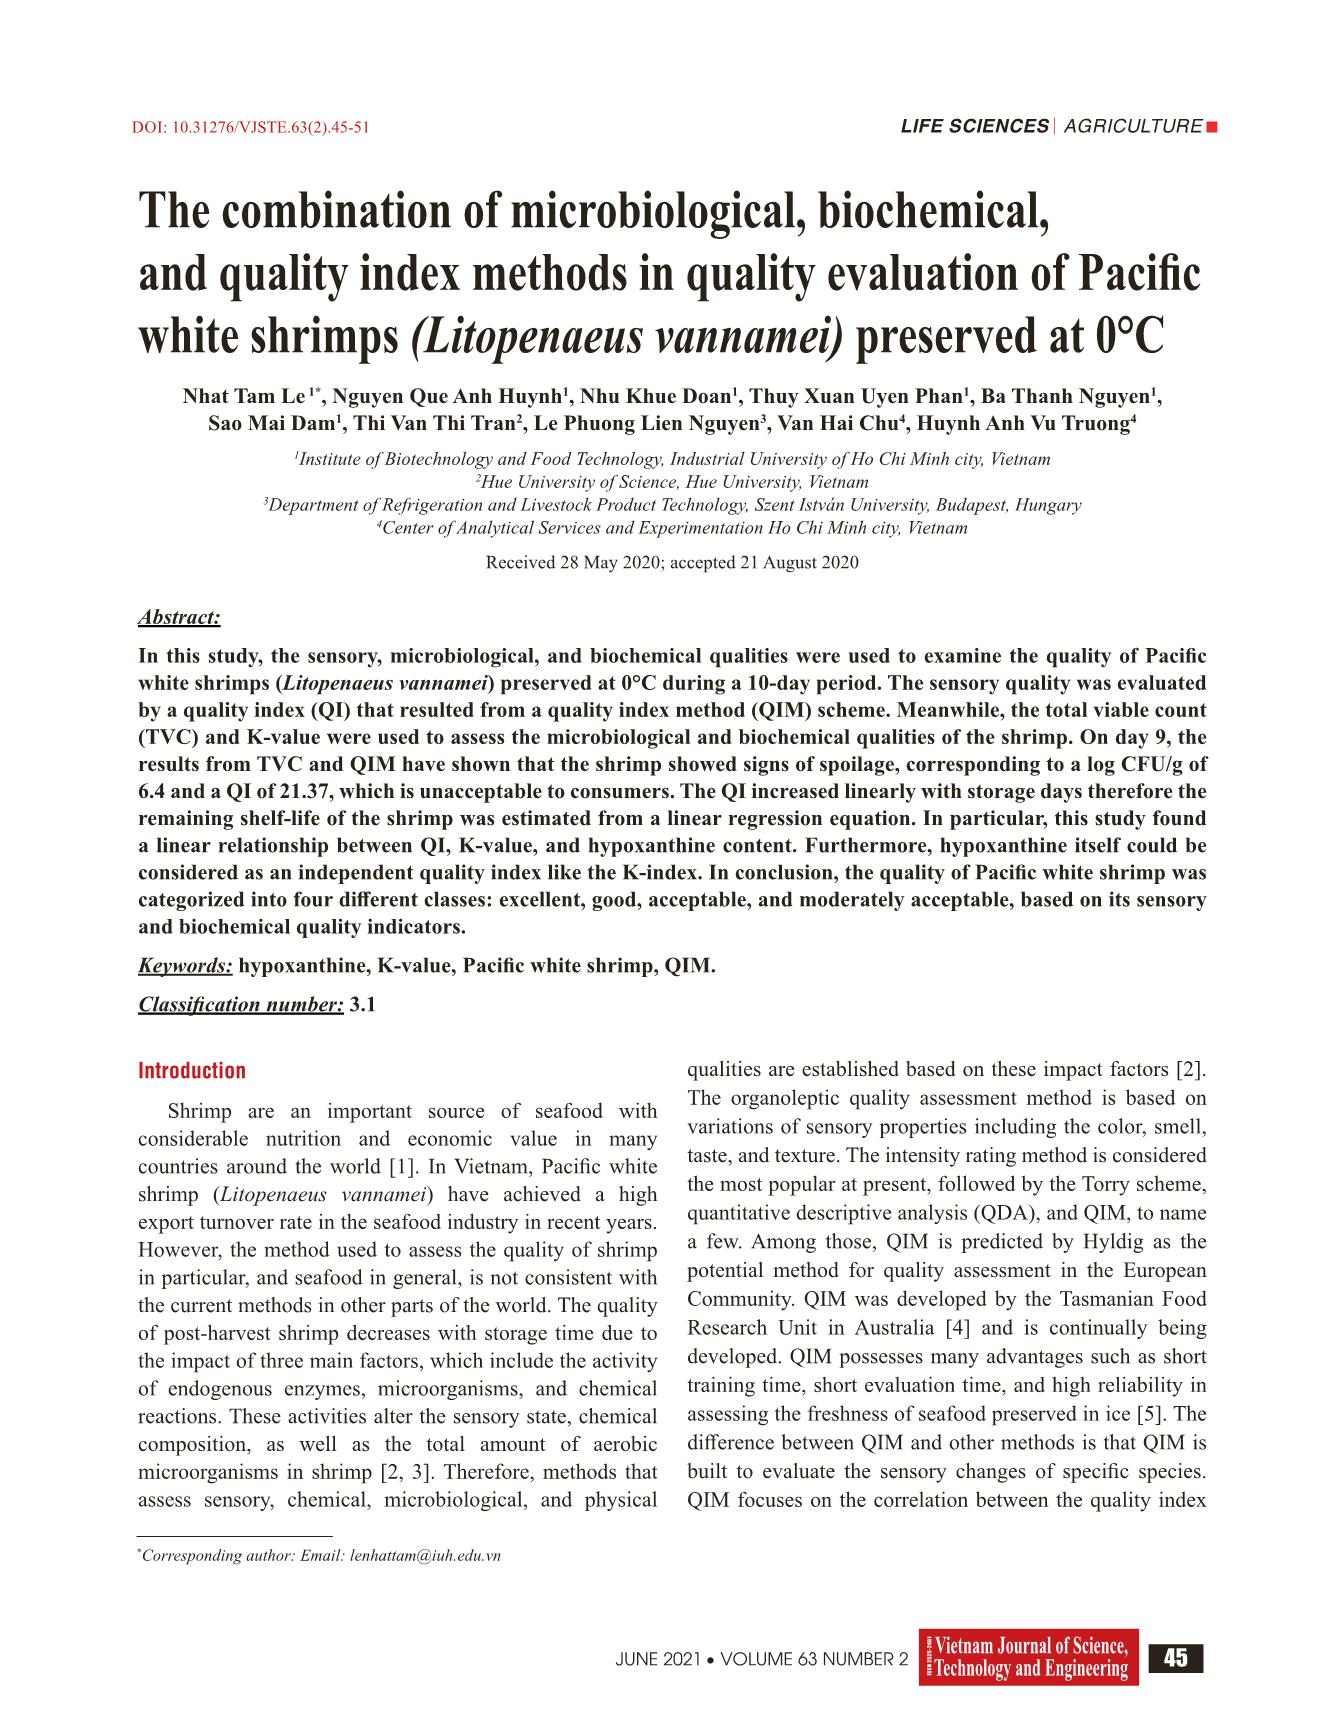 The combination of microbiological, biochemical, and quality index methods in quality evaluation of pacific white shrimps (Litopenaeus vannamei) preserved at 0°C trang 1